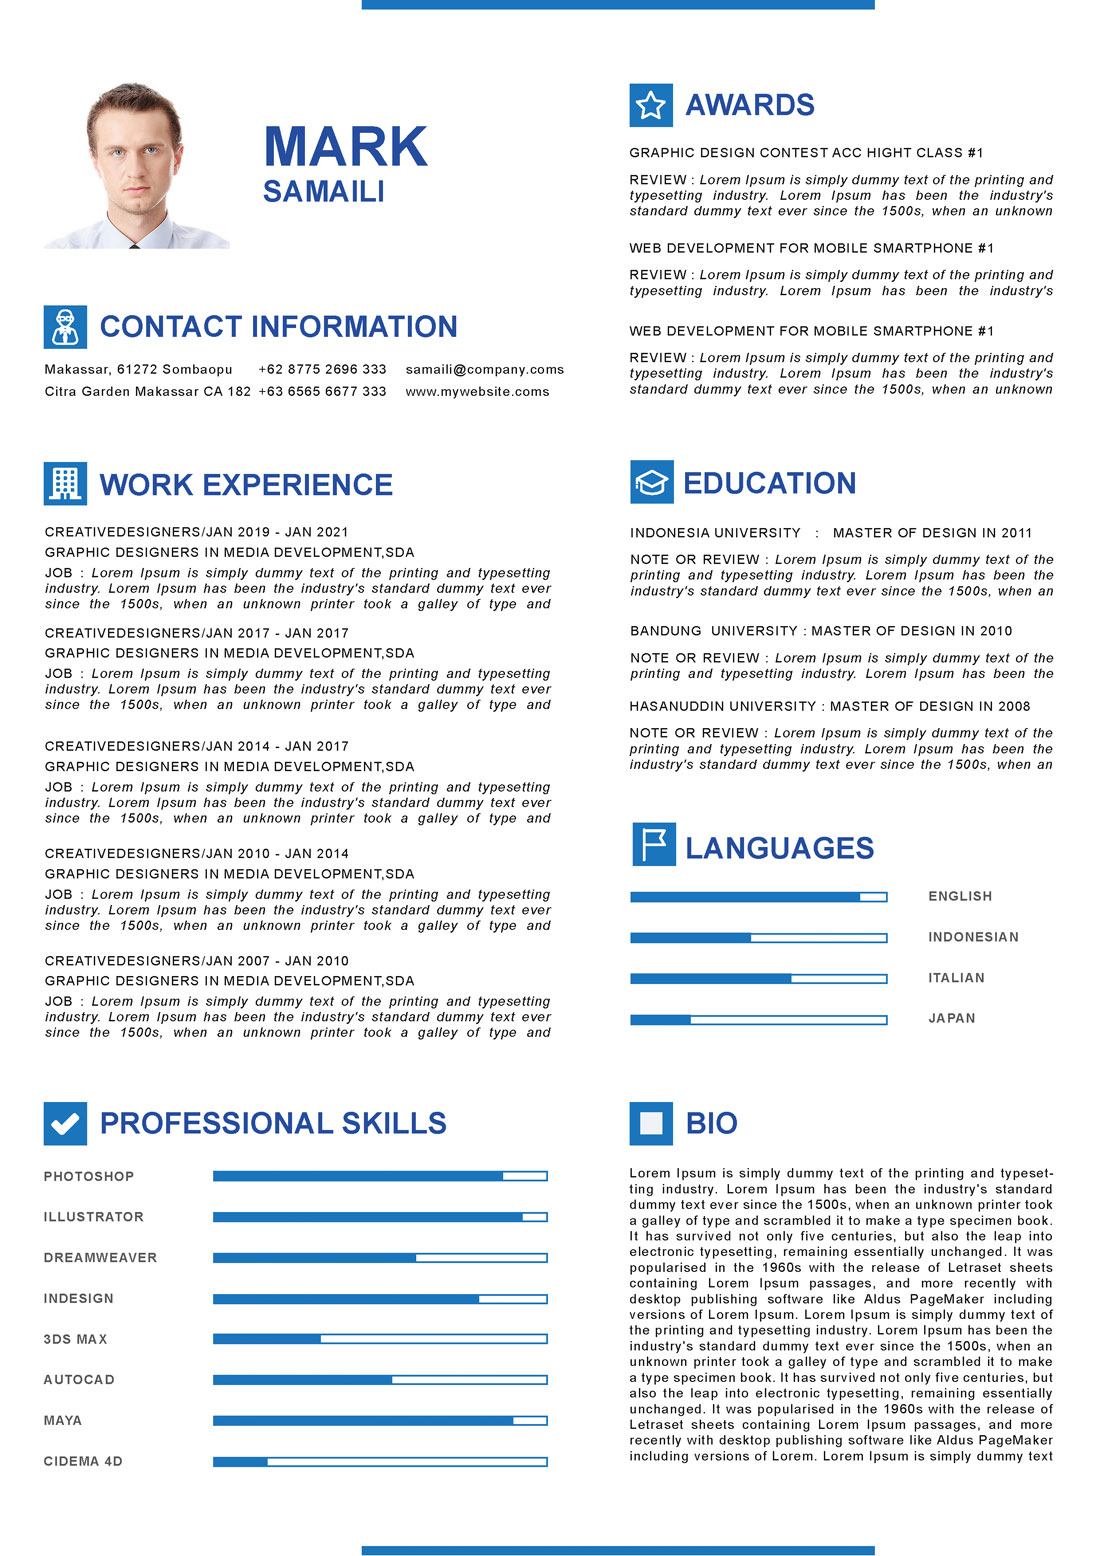 Blue and white resume for a job.